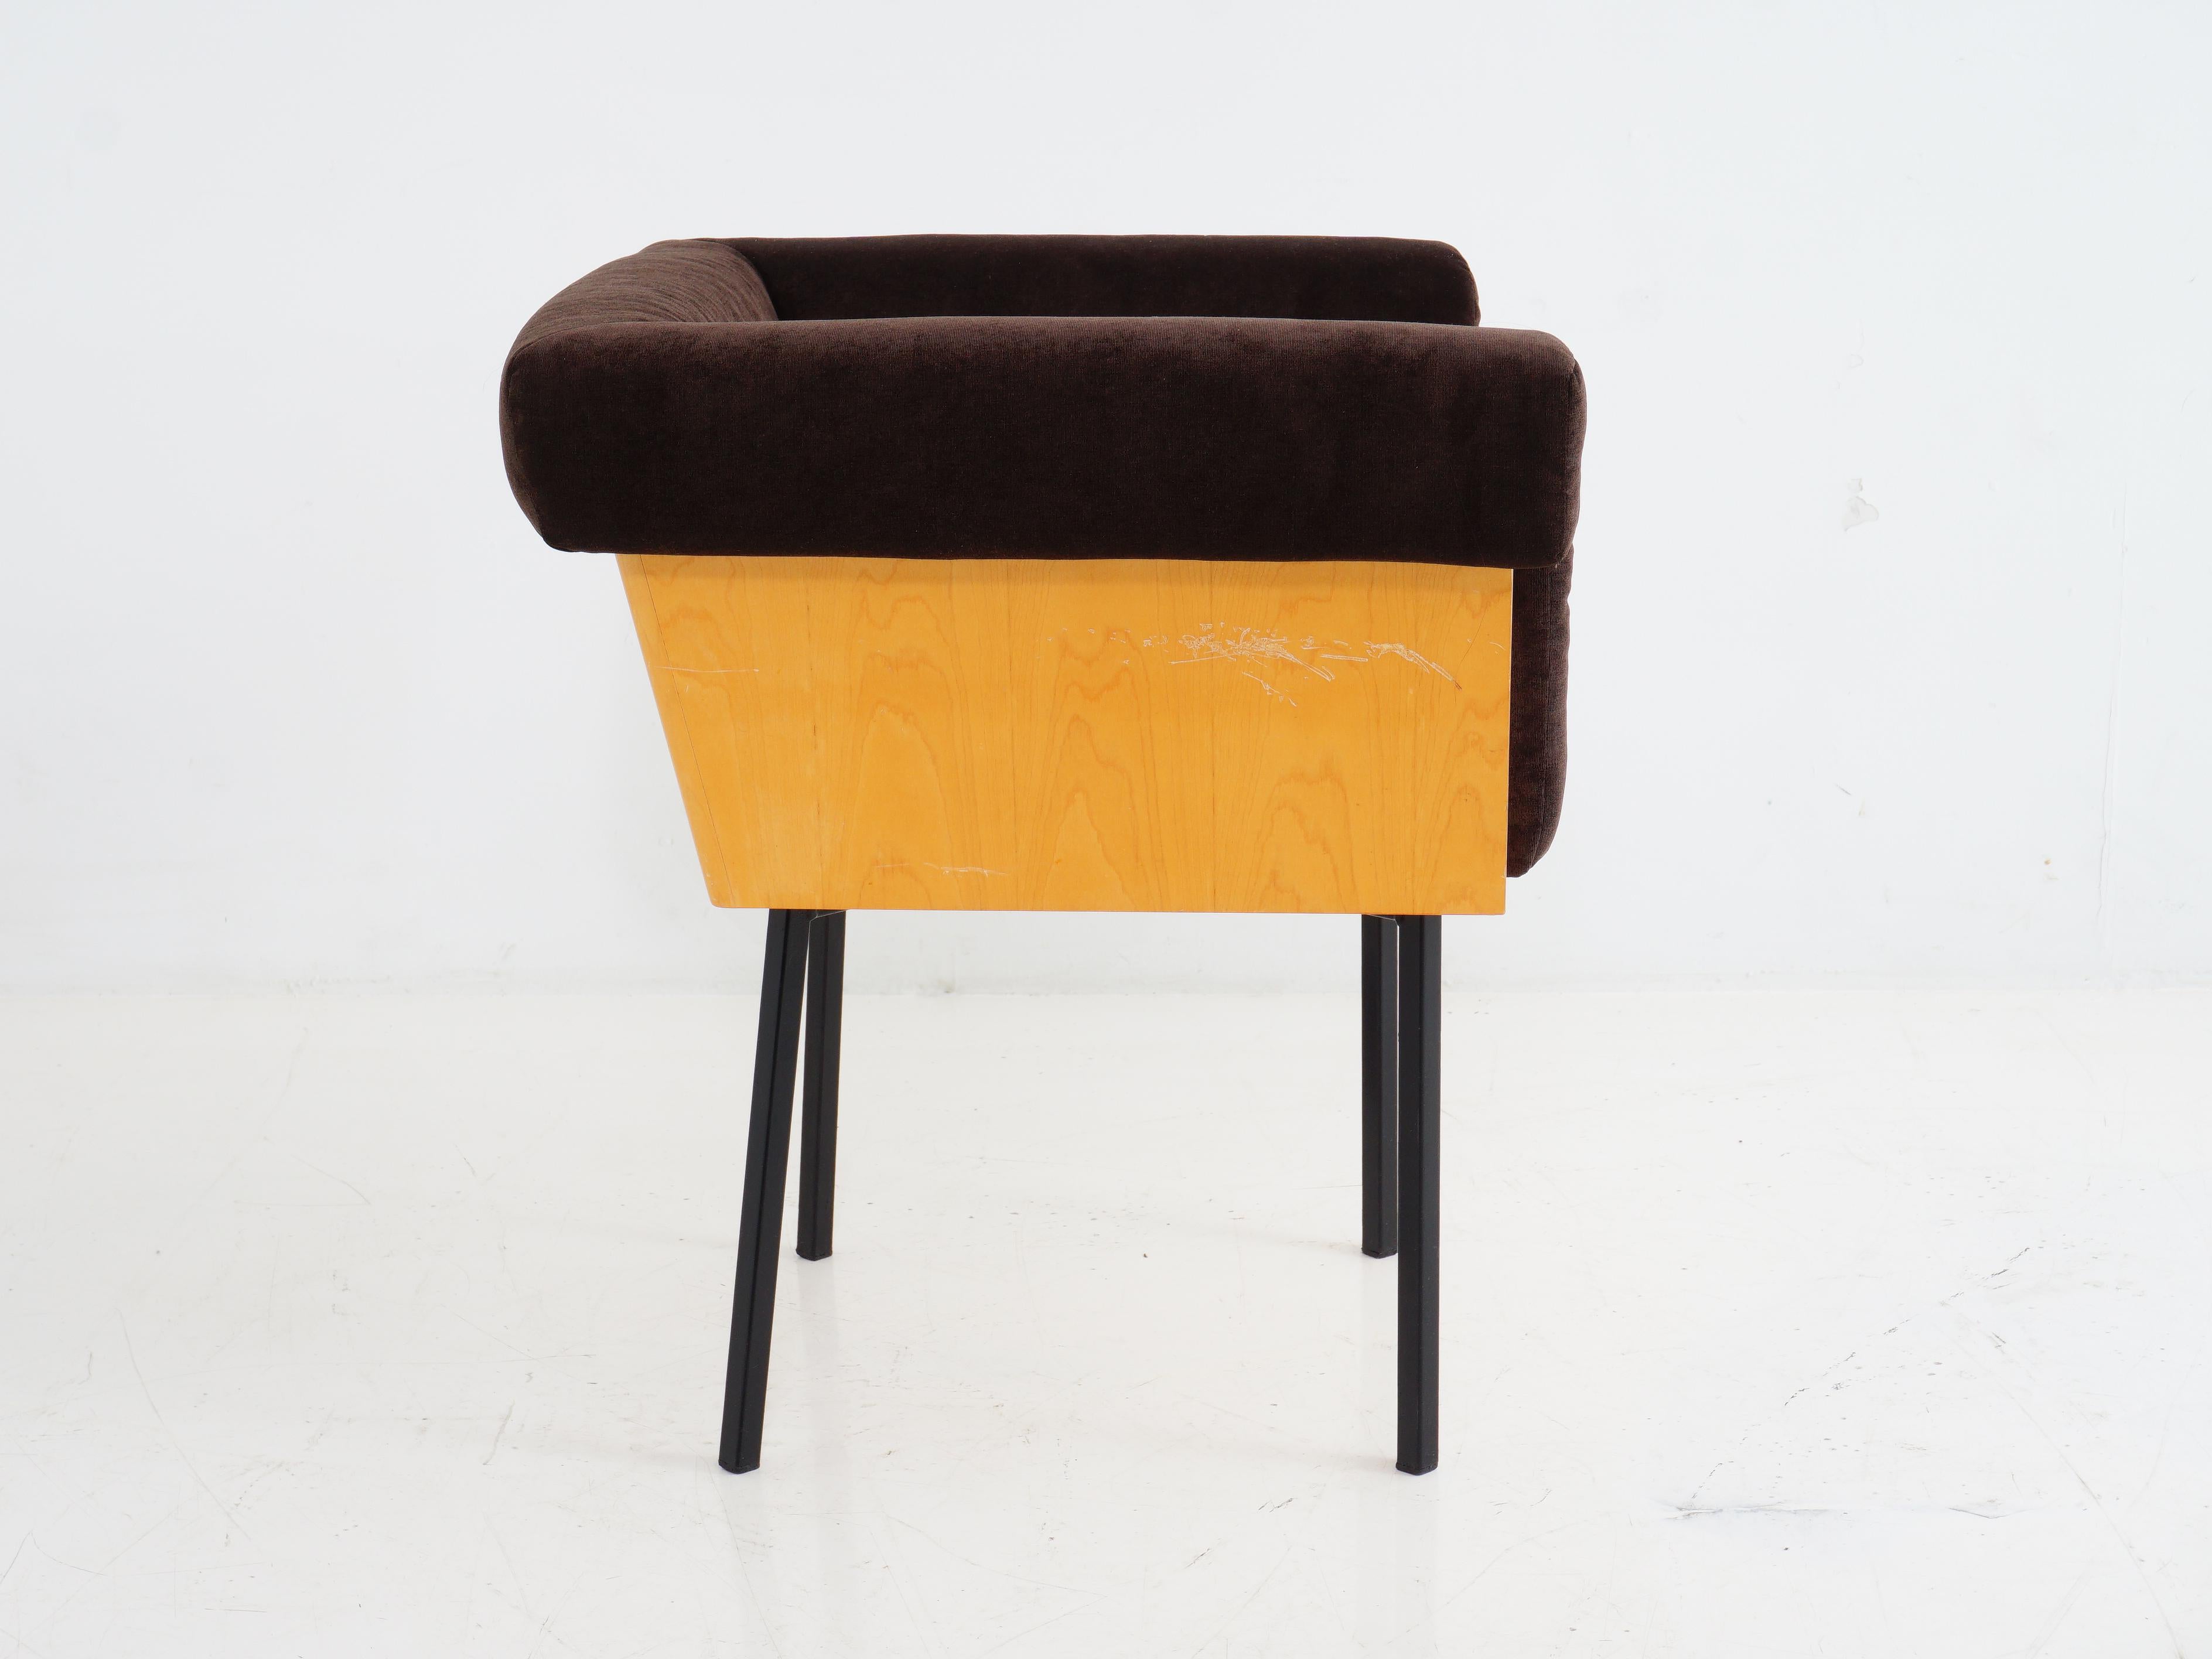 A midcentury style lounge chair that's equal parts chic and cozy. Wrapped in luxurious brown velvet, it's a nod to the days of sipping cocktails and grooving to vinyl. Get ready to sink into a world of retro-cool.

- 28.5